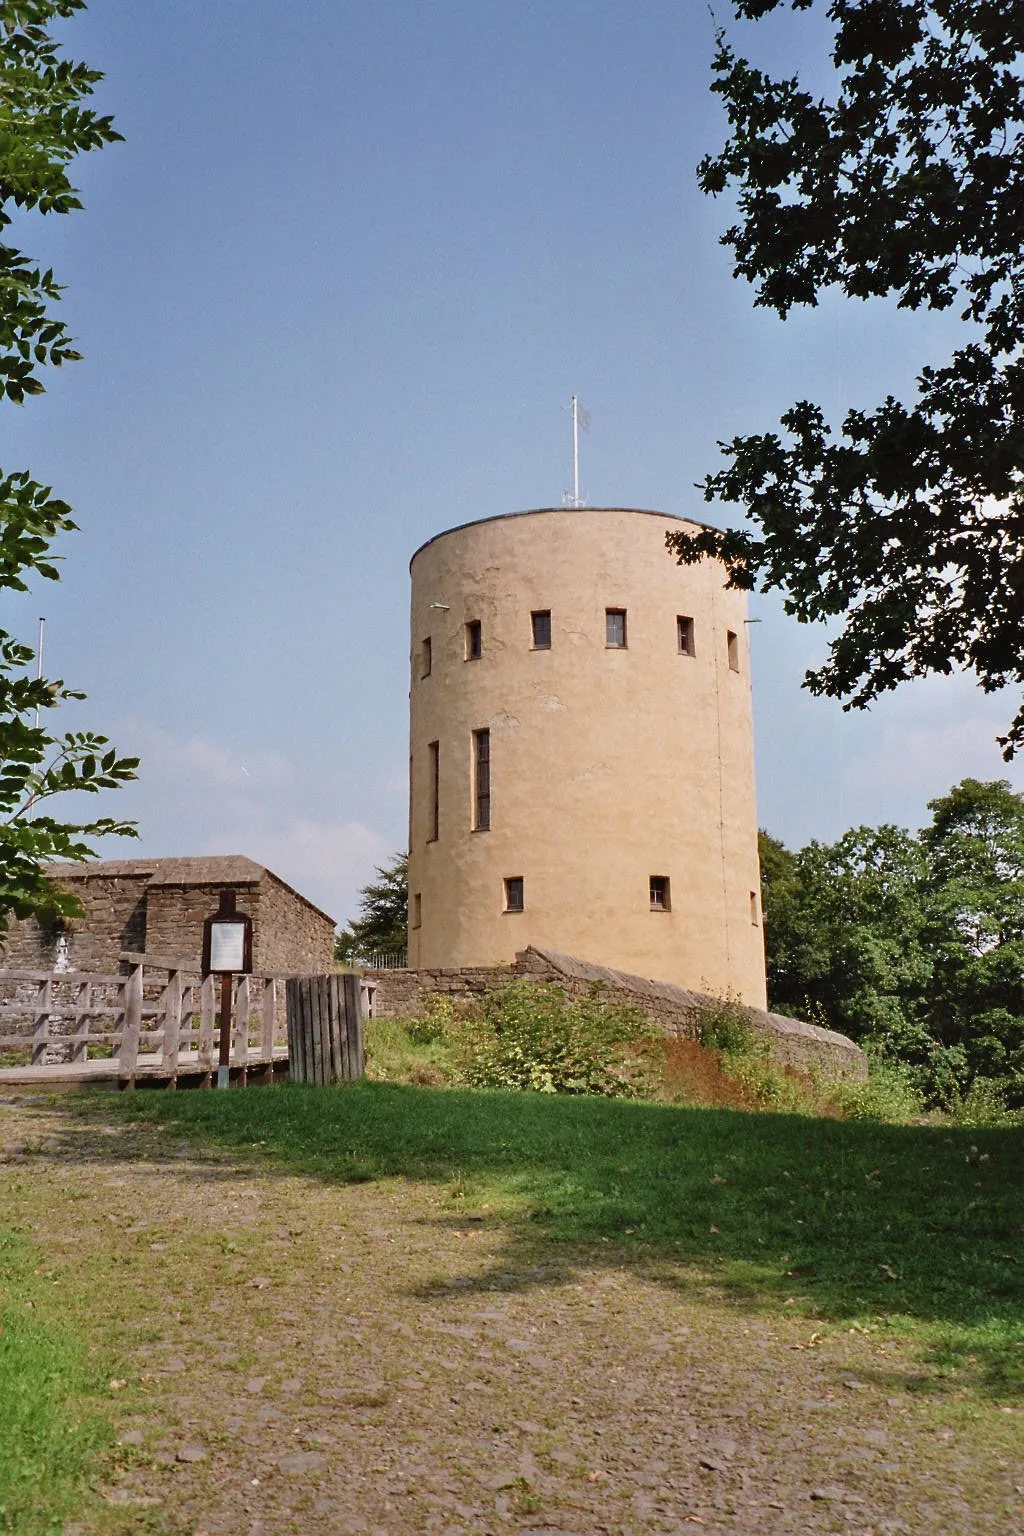 Photo showing: The tower of the Ginsburg in Germany